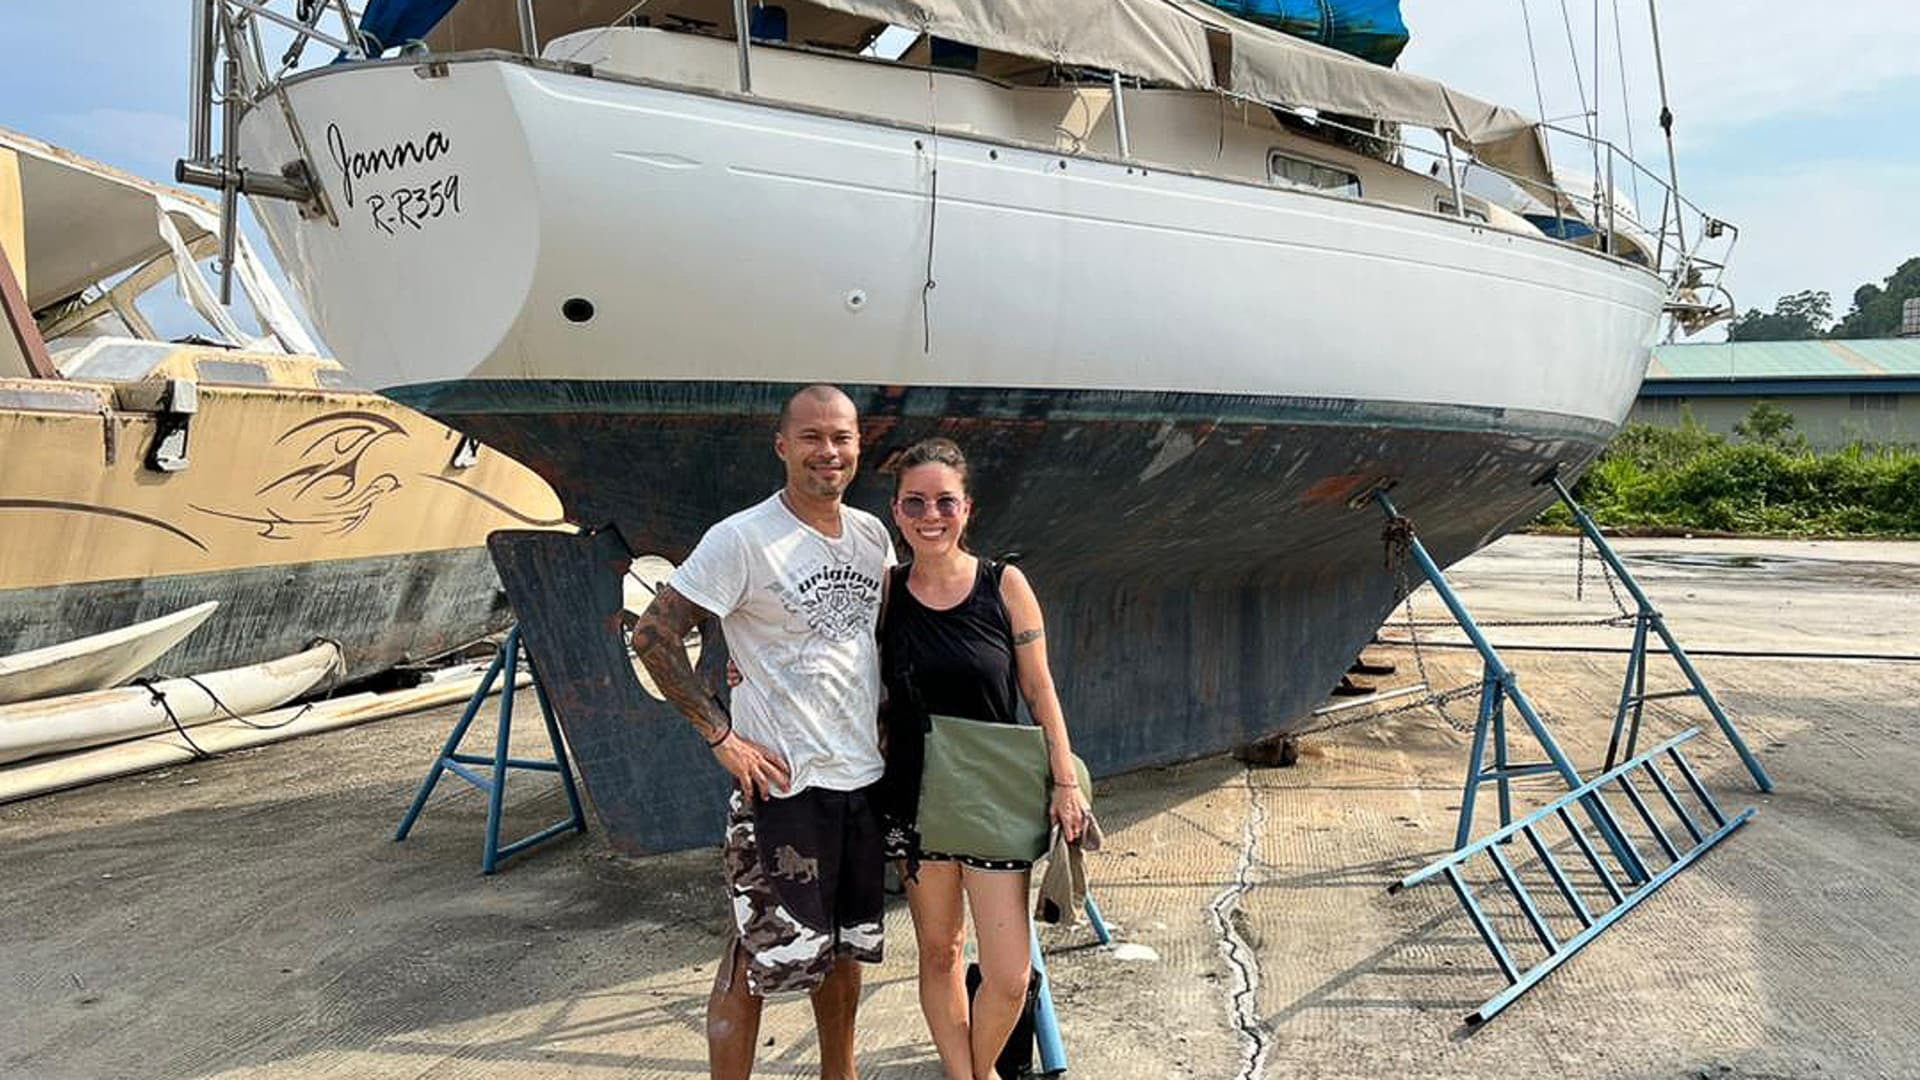 'We're not rich:' couple share one cash tip that allows them to travel full-time - on land and at sea